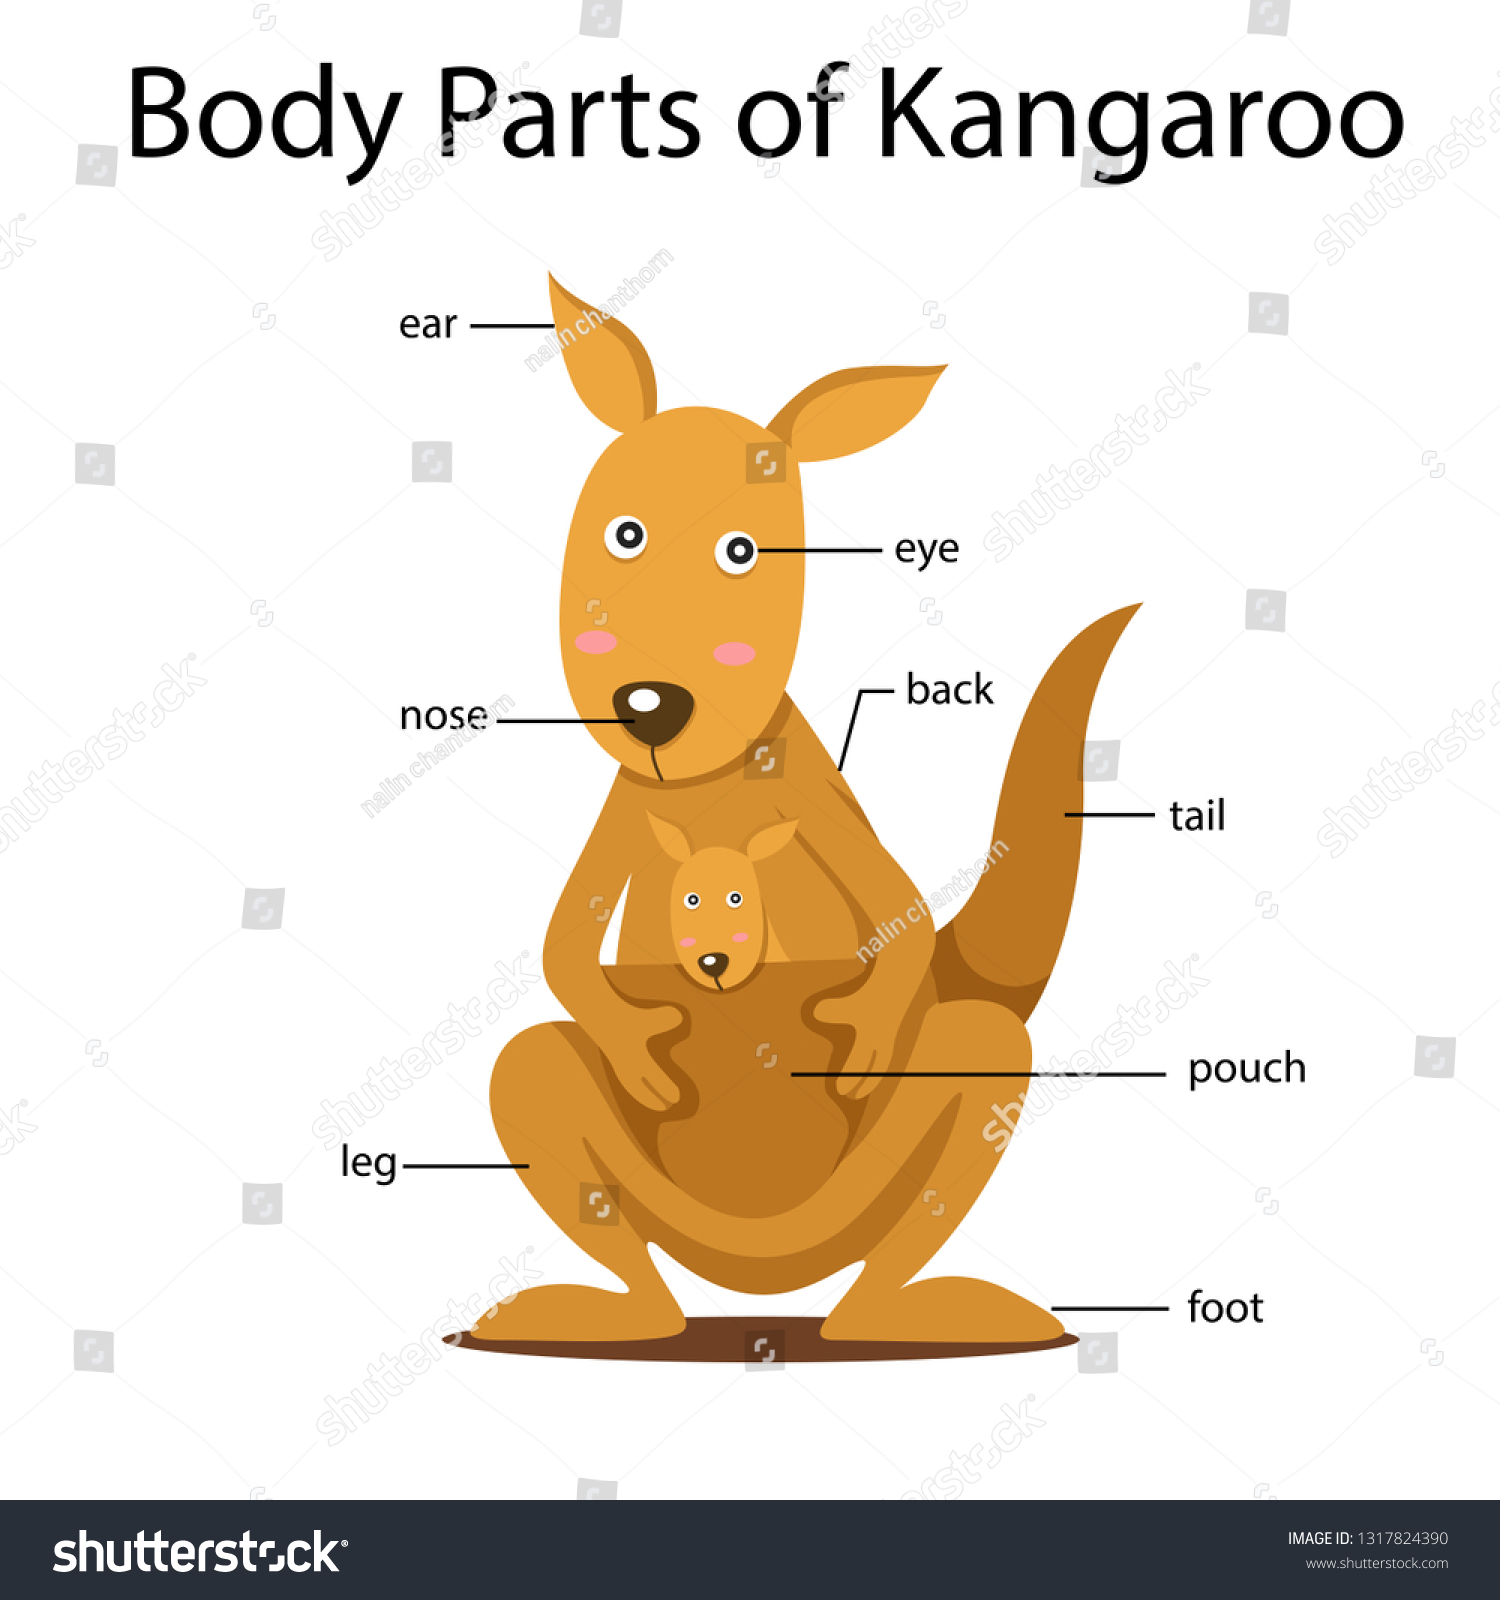 What are the body parts of a kangaroo?